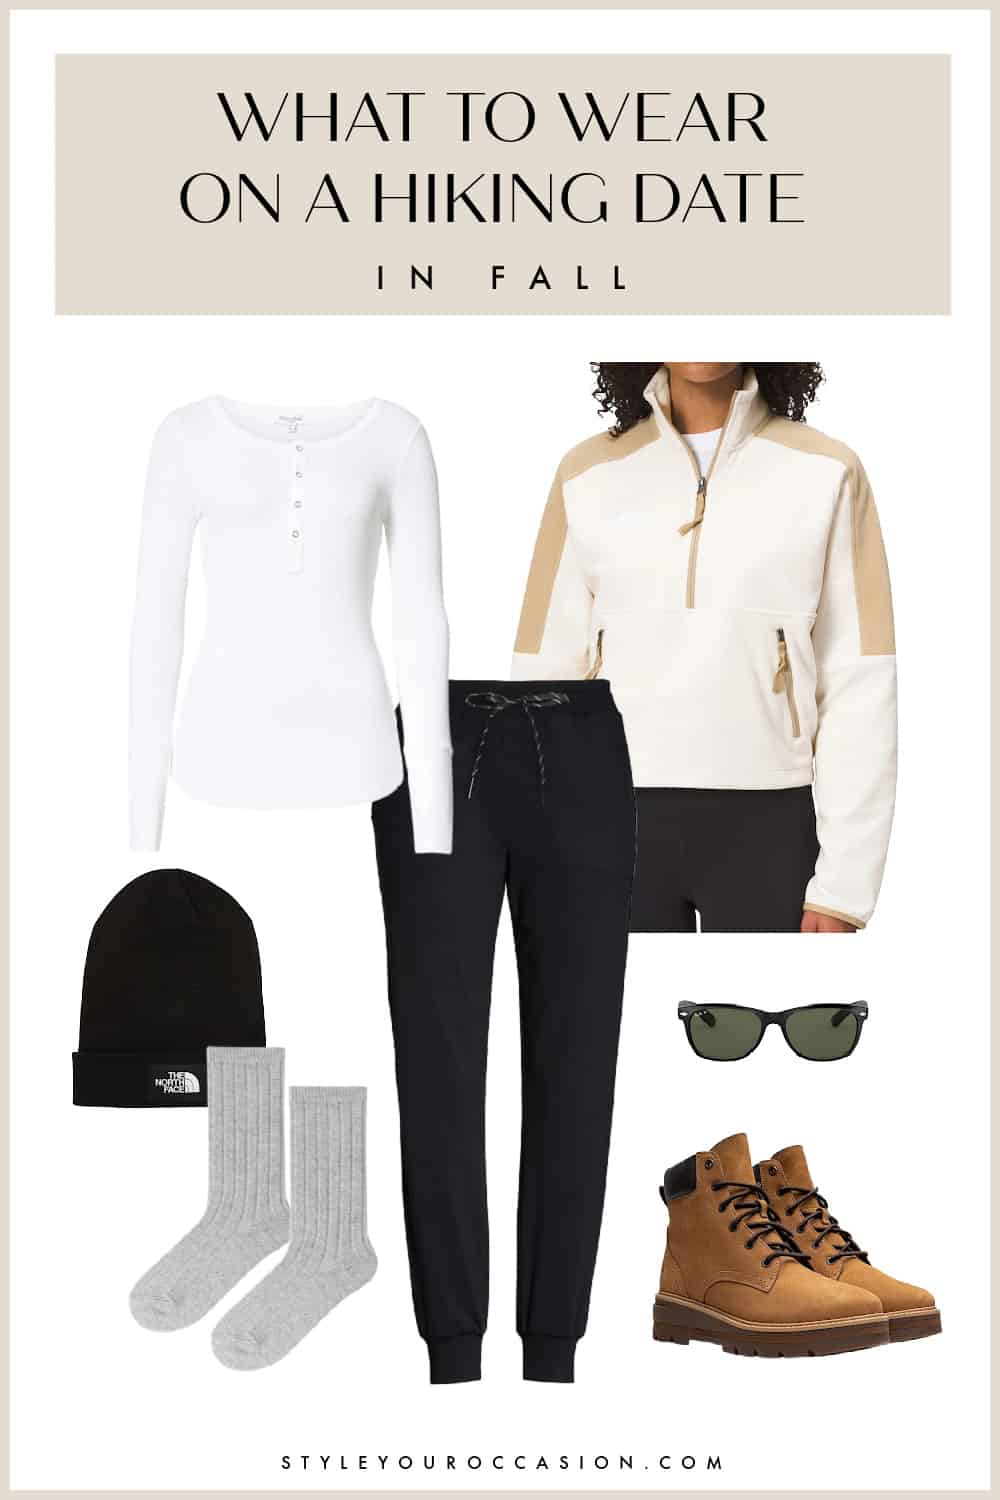 outfit collage for what to wear on a hiking date in the the fall with a fleece jacket, thermal top, leggings, hiking boots, wool socks and knit toque